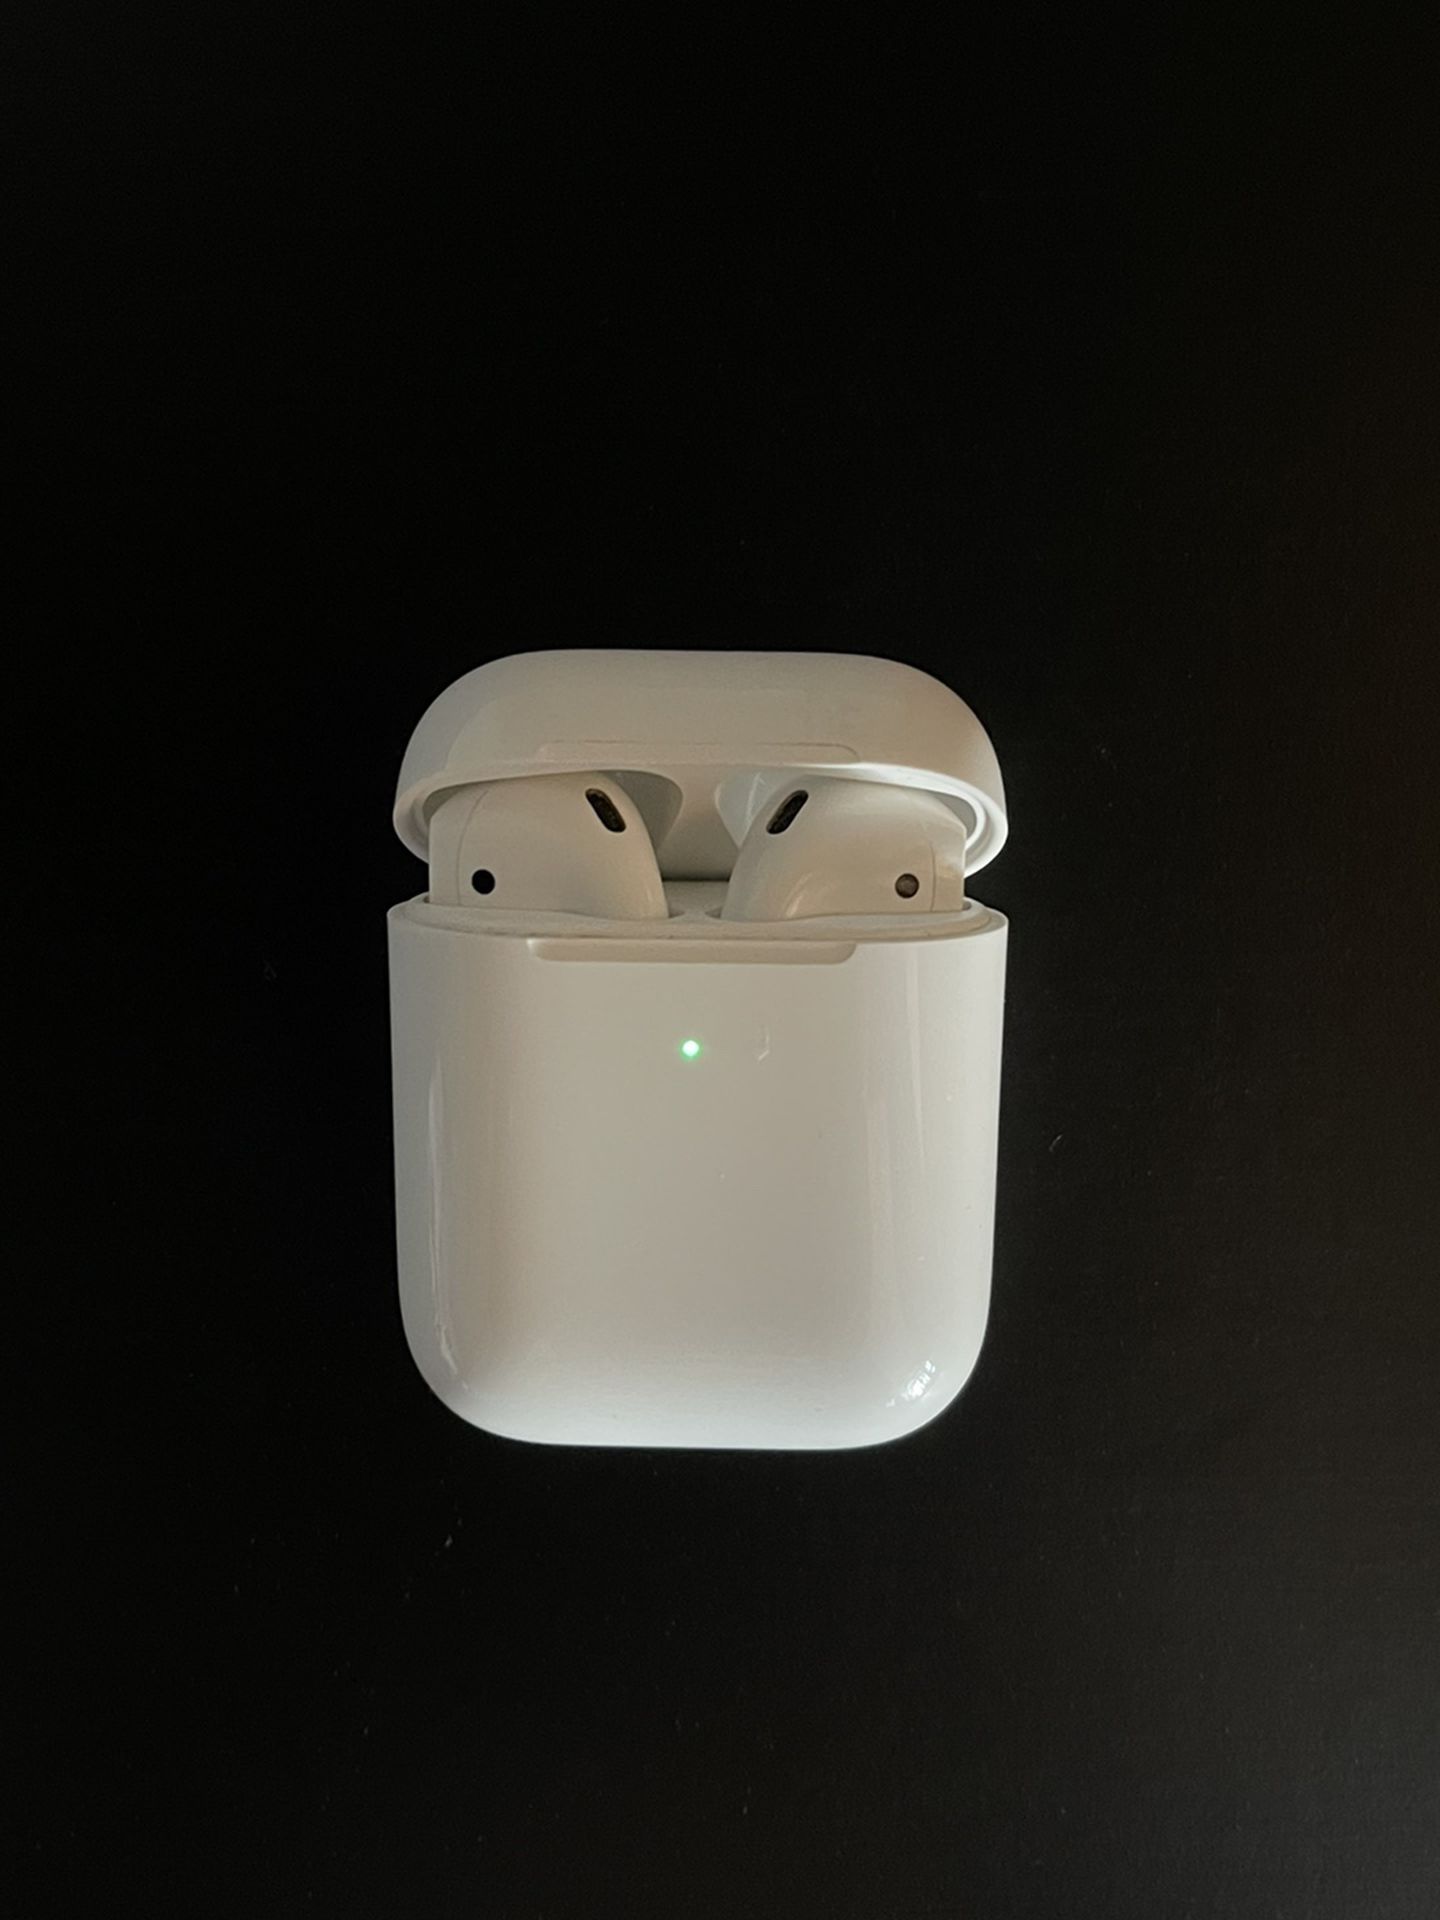 Apple AirPods w/wireless charging case